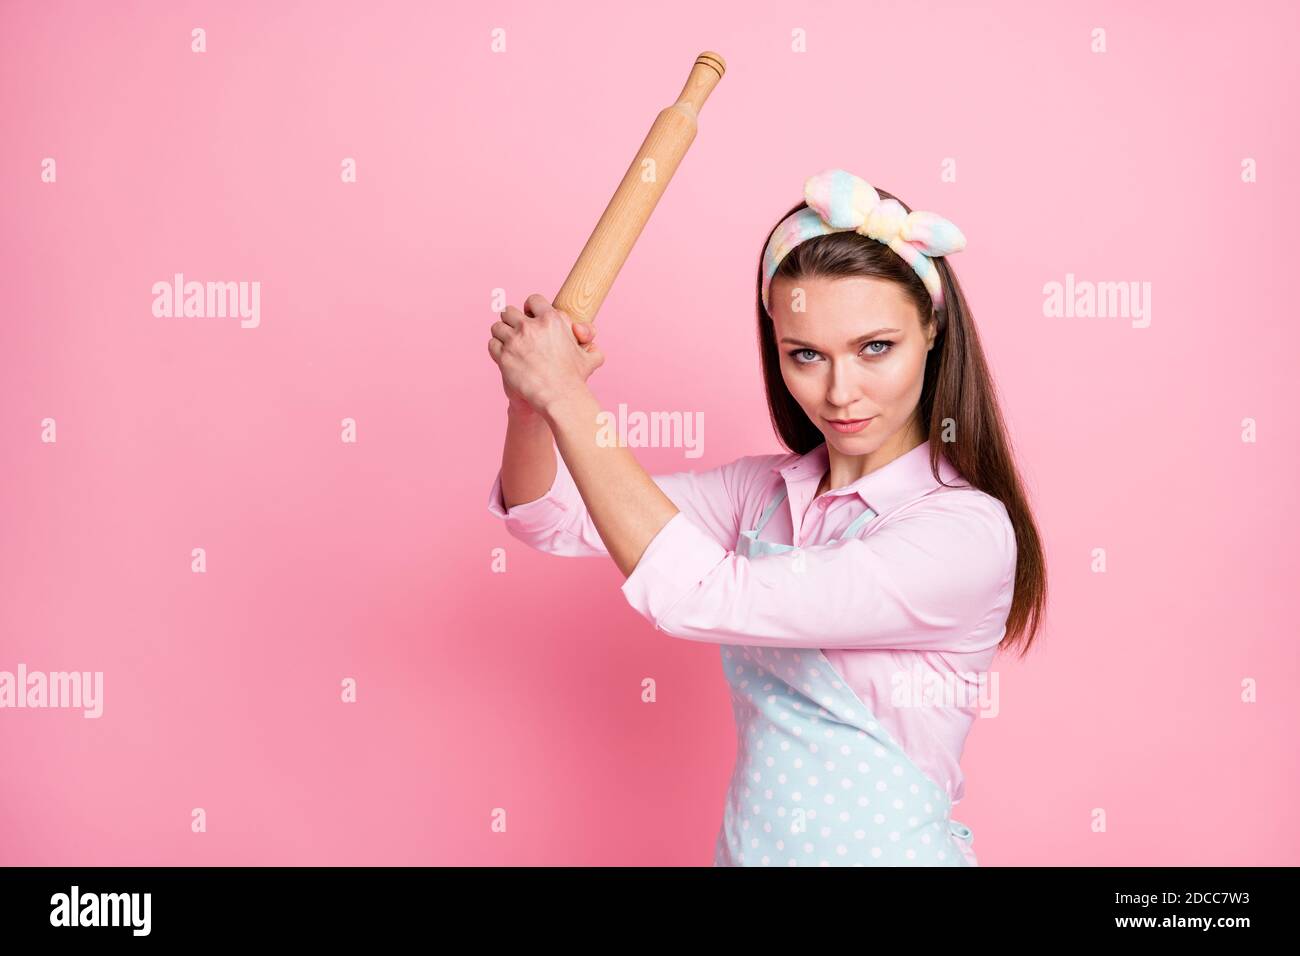 Close-up portrait of her she nice attractive dangerous angry serious housewife holding in hands wooden rolling pin threatening fighting rights Stock Photo